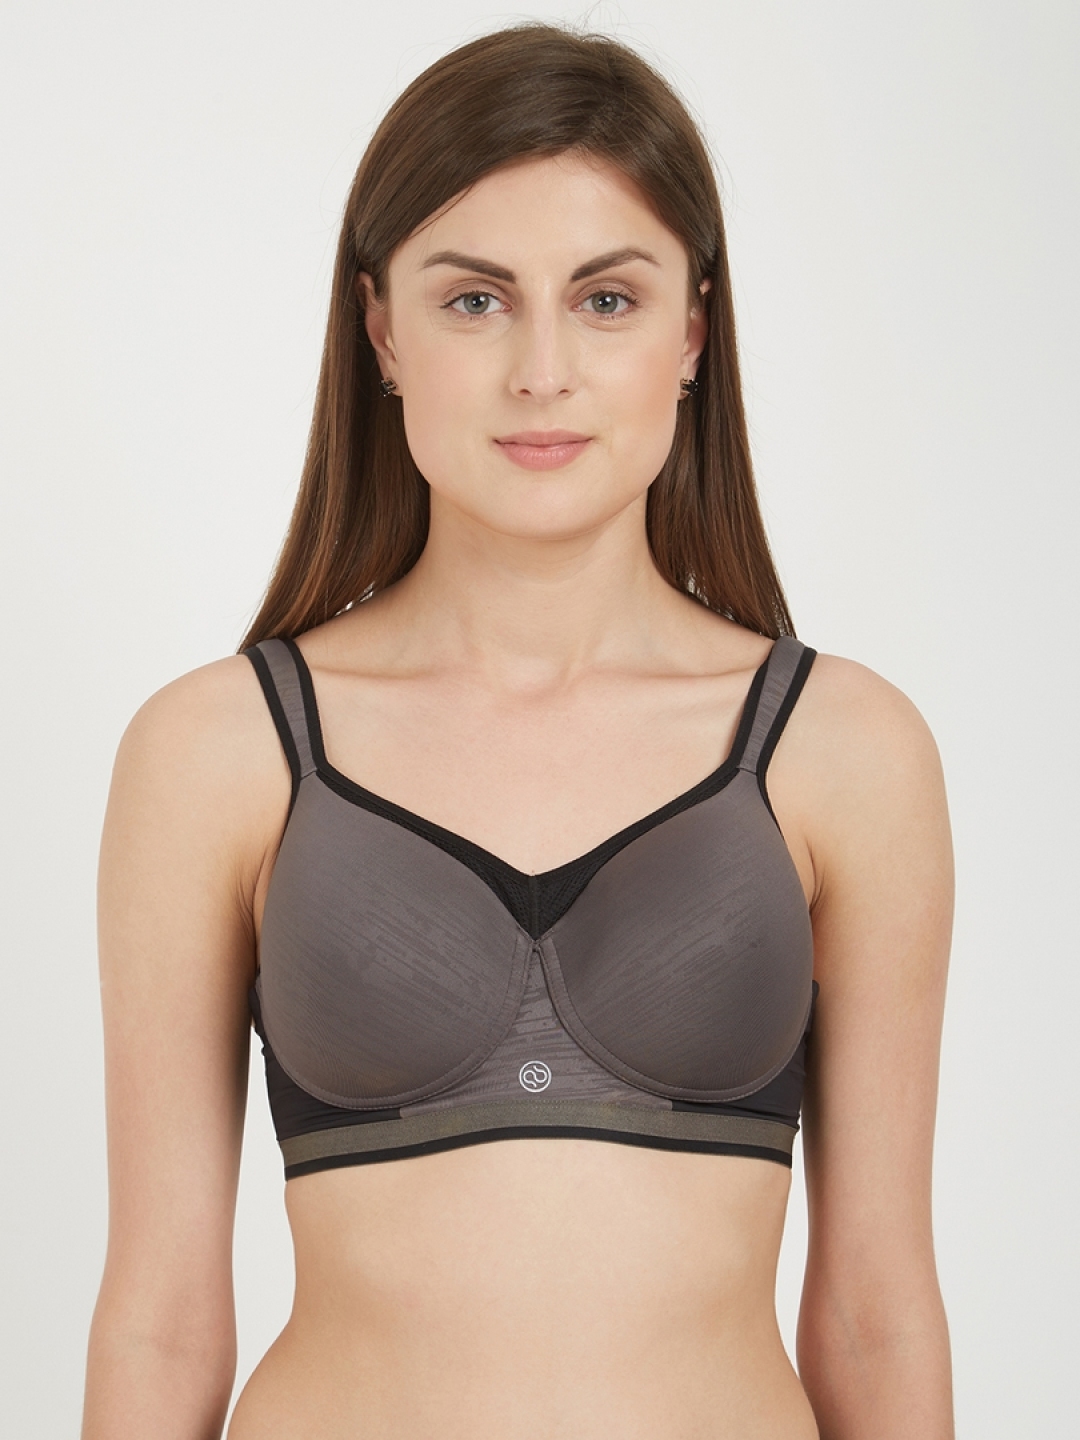 Buy SOIE Womens Padded Non Wired Full Coverage Bra